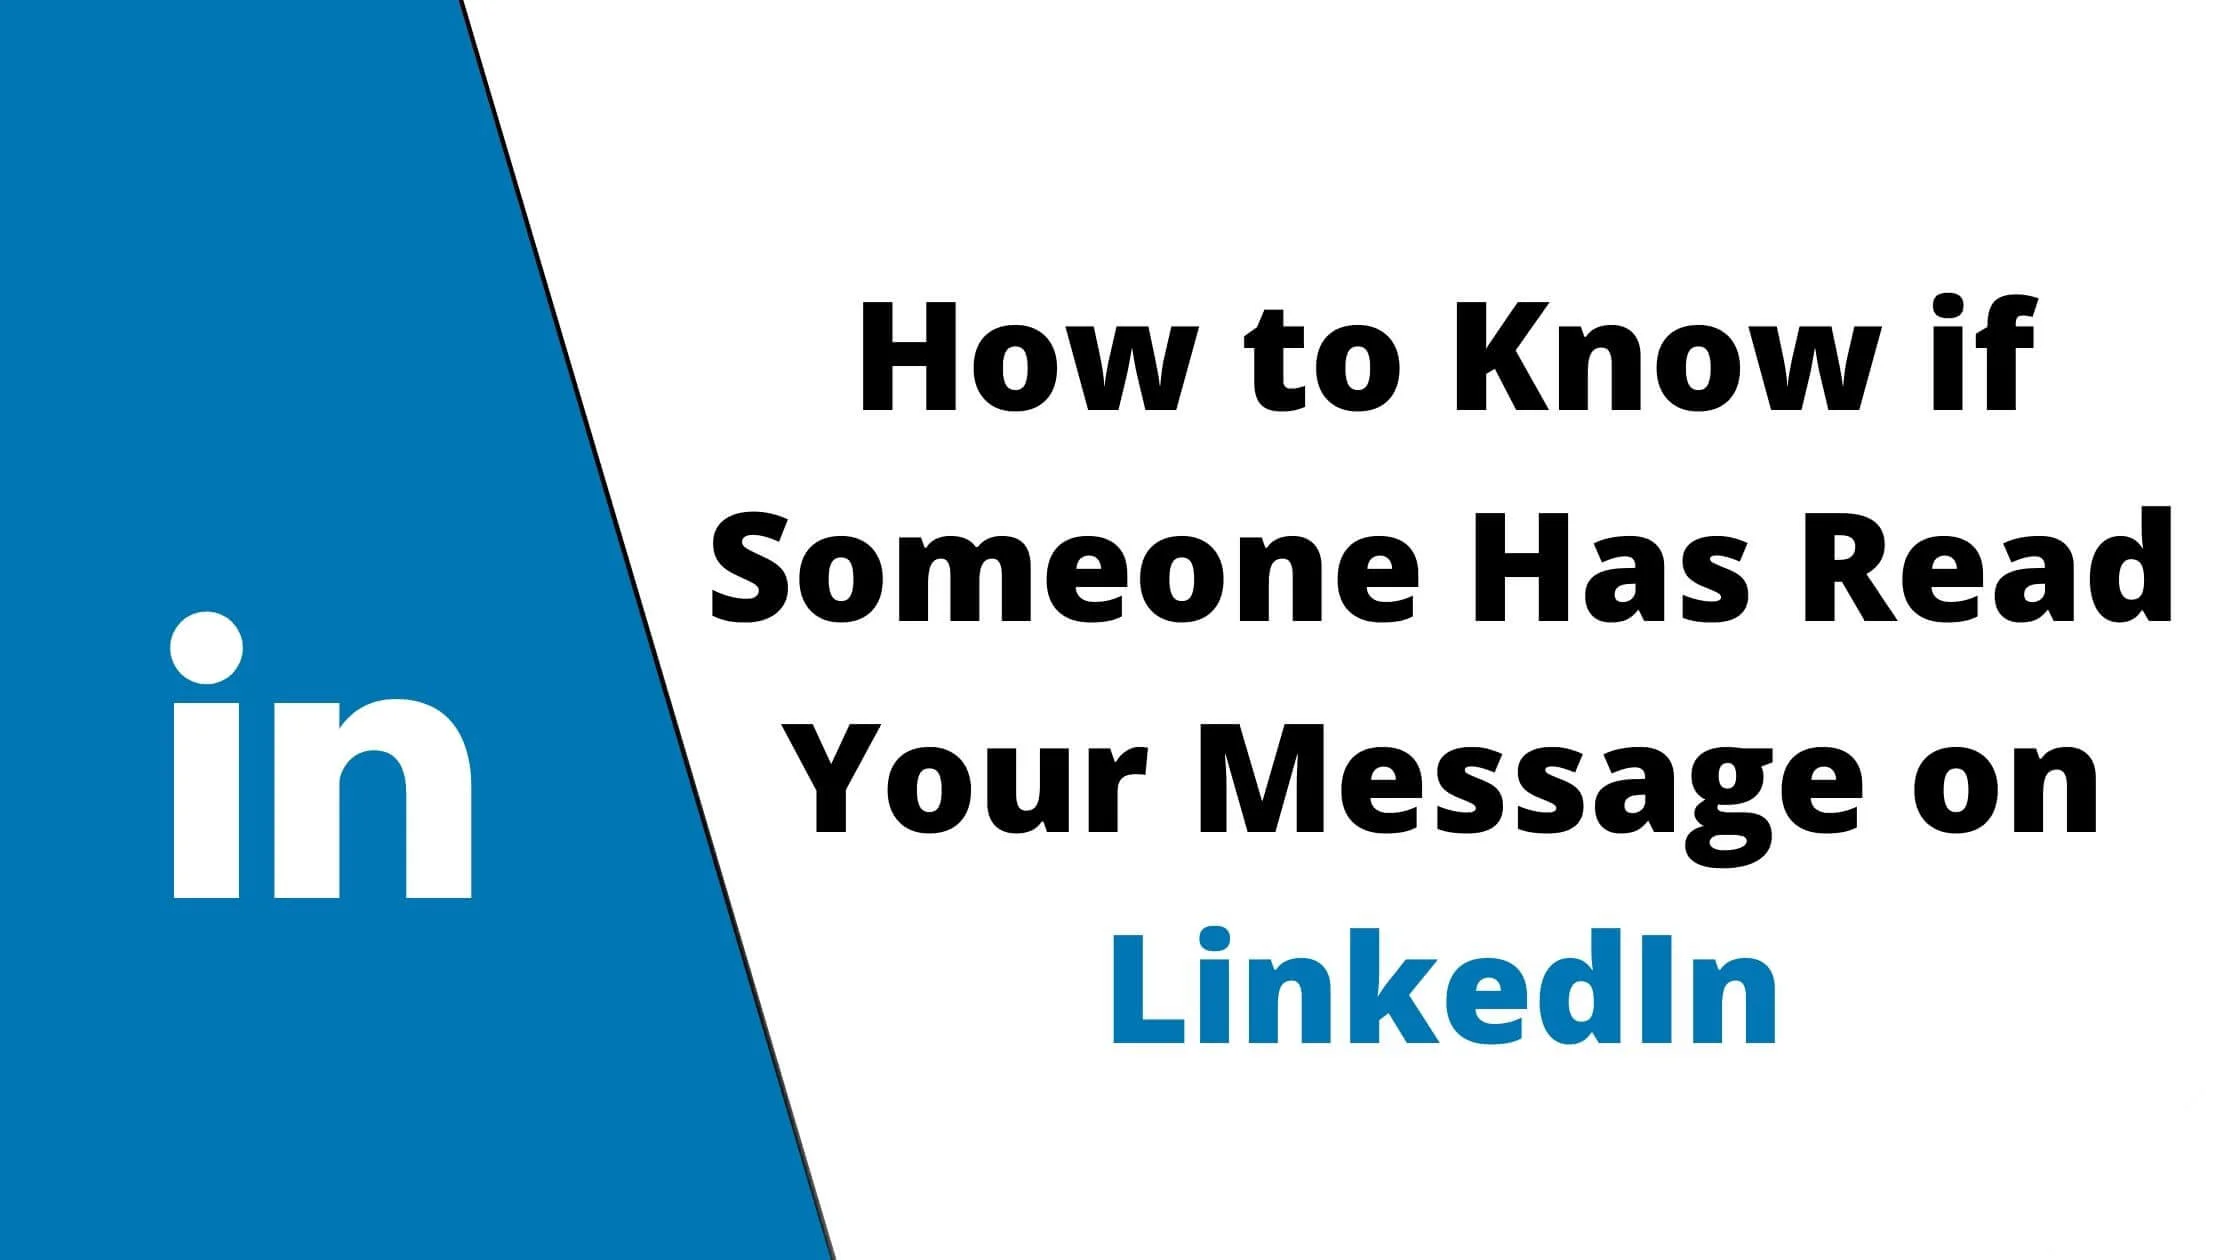 How to know if someone has read your message on LinkedIn